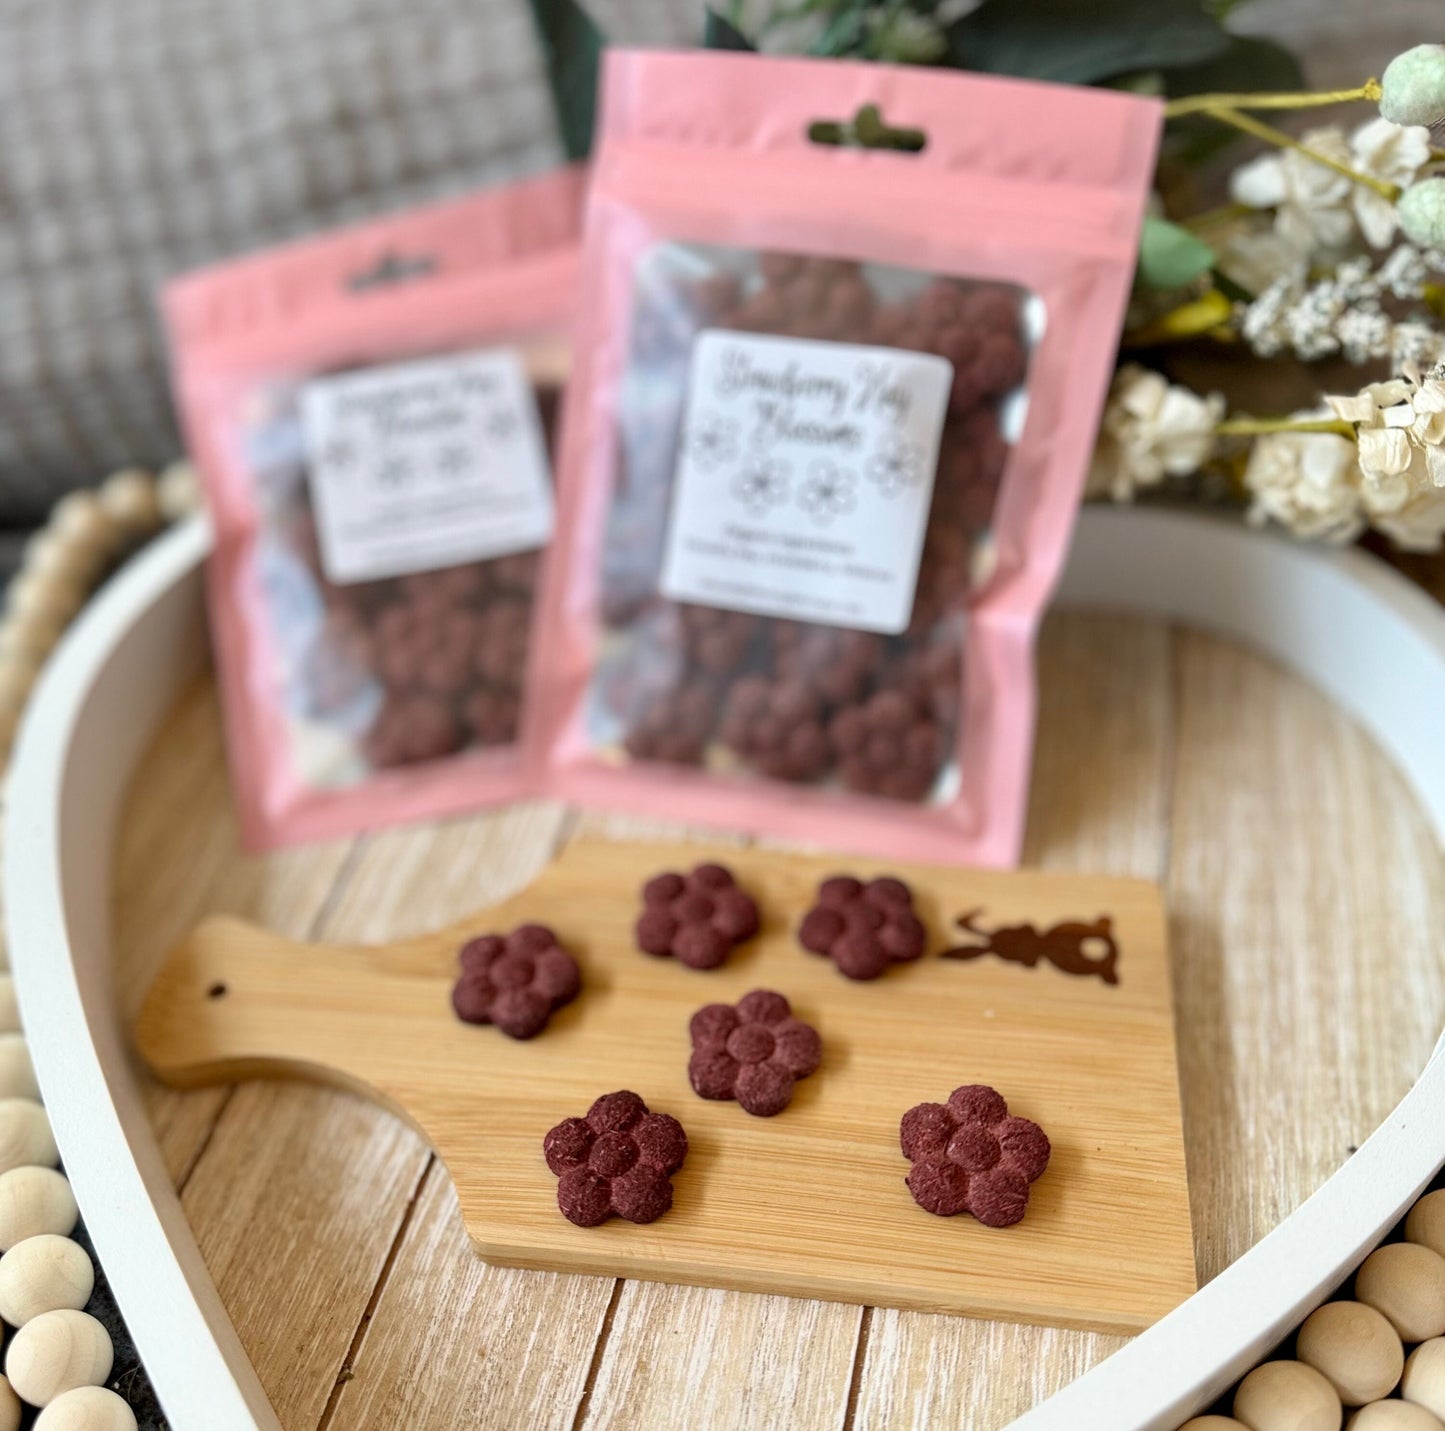 Strawberry Hay Blossoms | Spring Inspired OAT FREE Timothy Hay Based Treats, Healthy, Organic, Crunchy Snacks for Rabbits, & Small Pets